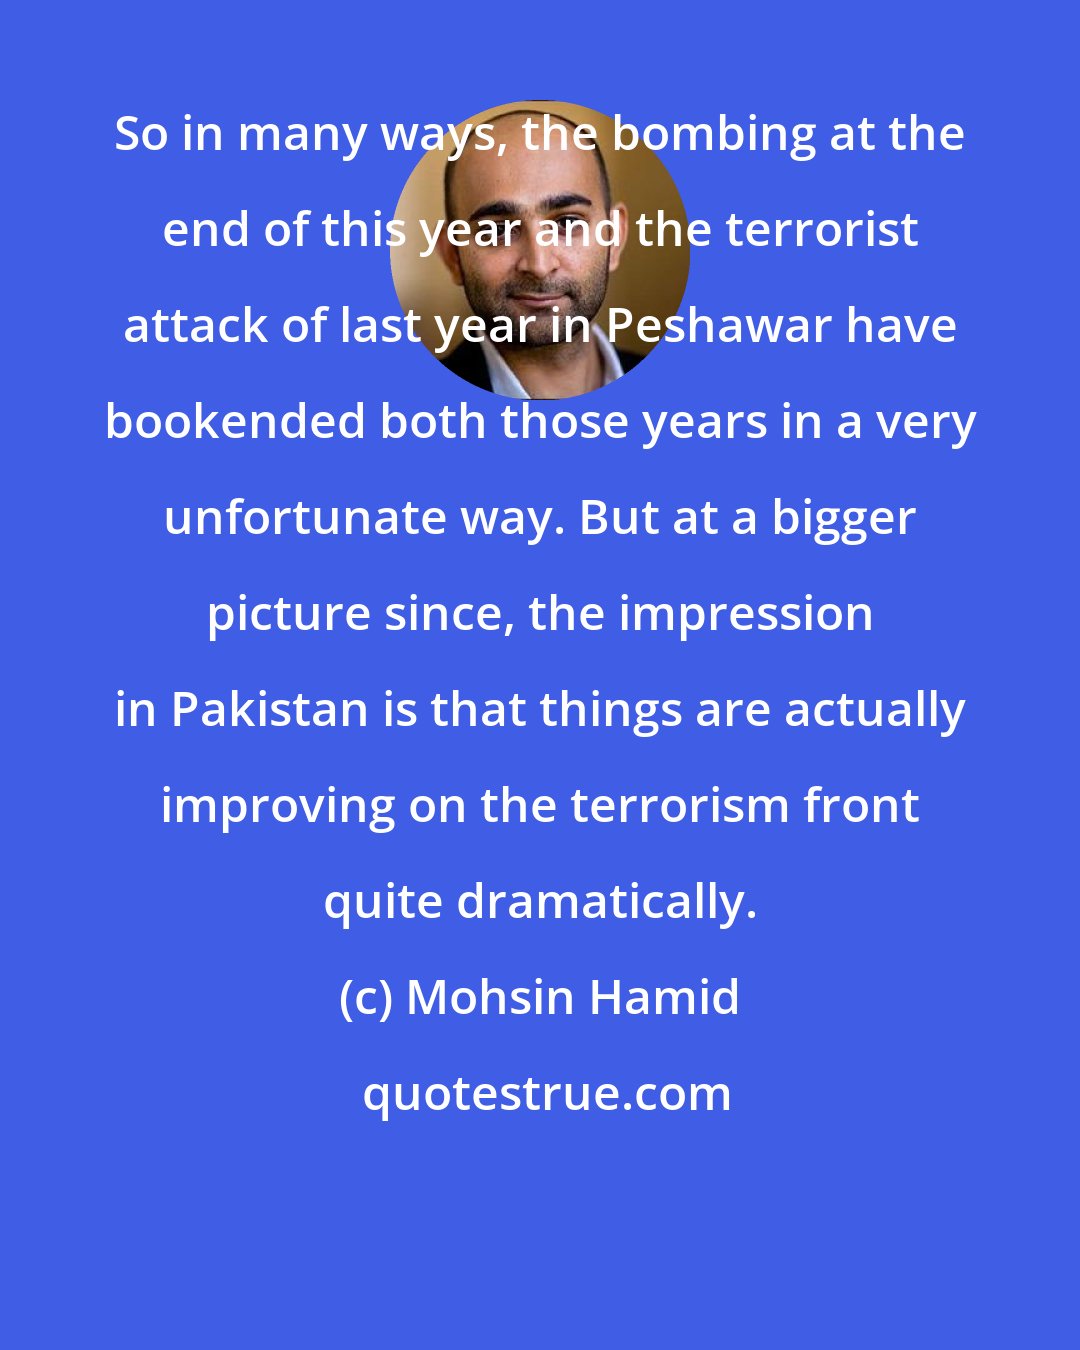 Mohsin Hamid: So in many ways, the bombing at the end of this year and the terrorist attack of last year in Peshawar have bookended both those years in a very unfortunate way. But at a bigger picture since, the impression in Pakistan is that things are actually improving on the terrorism front quite dramatically.